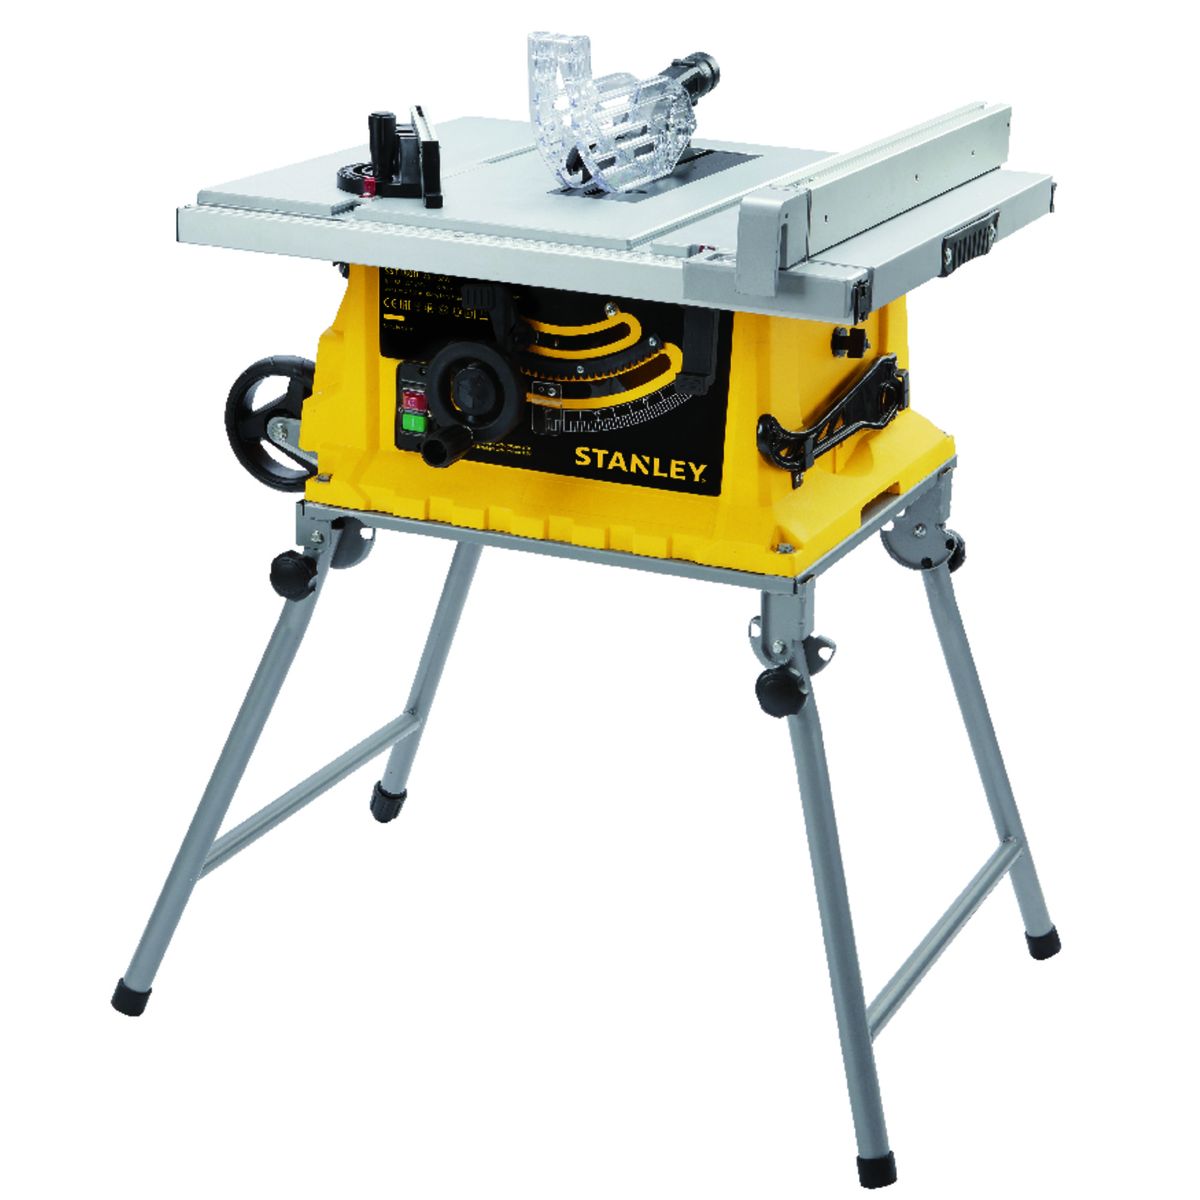 STANLEY - 1800W 254mm Table Saw With Fold-out Stand